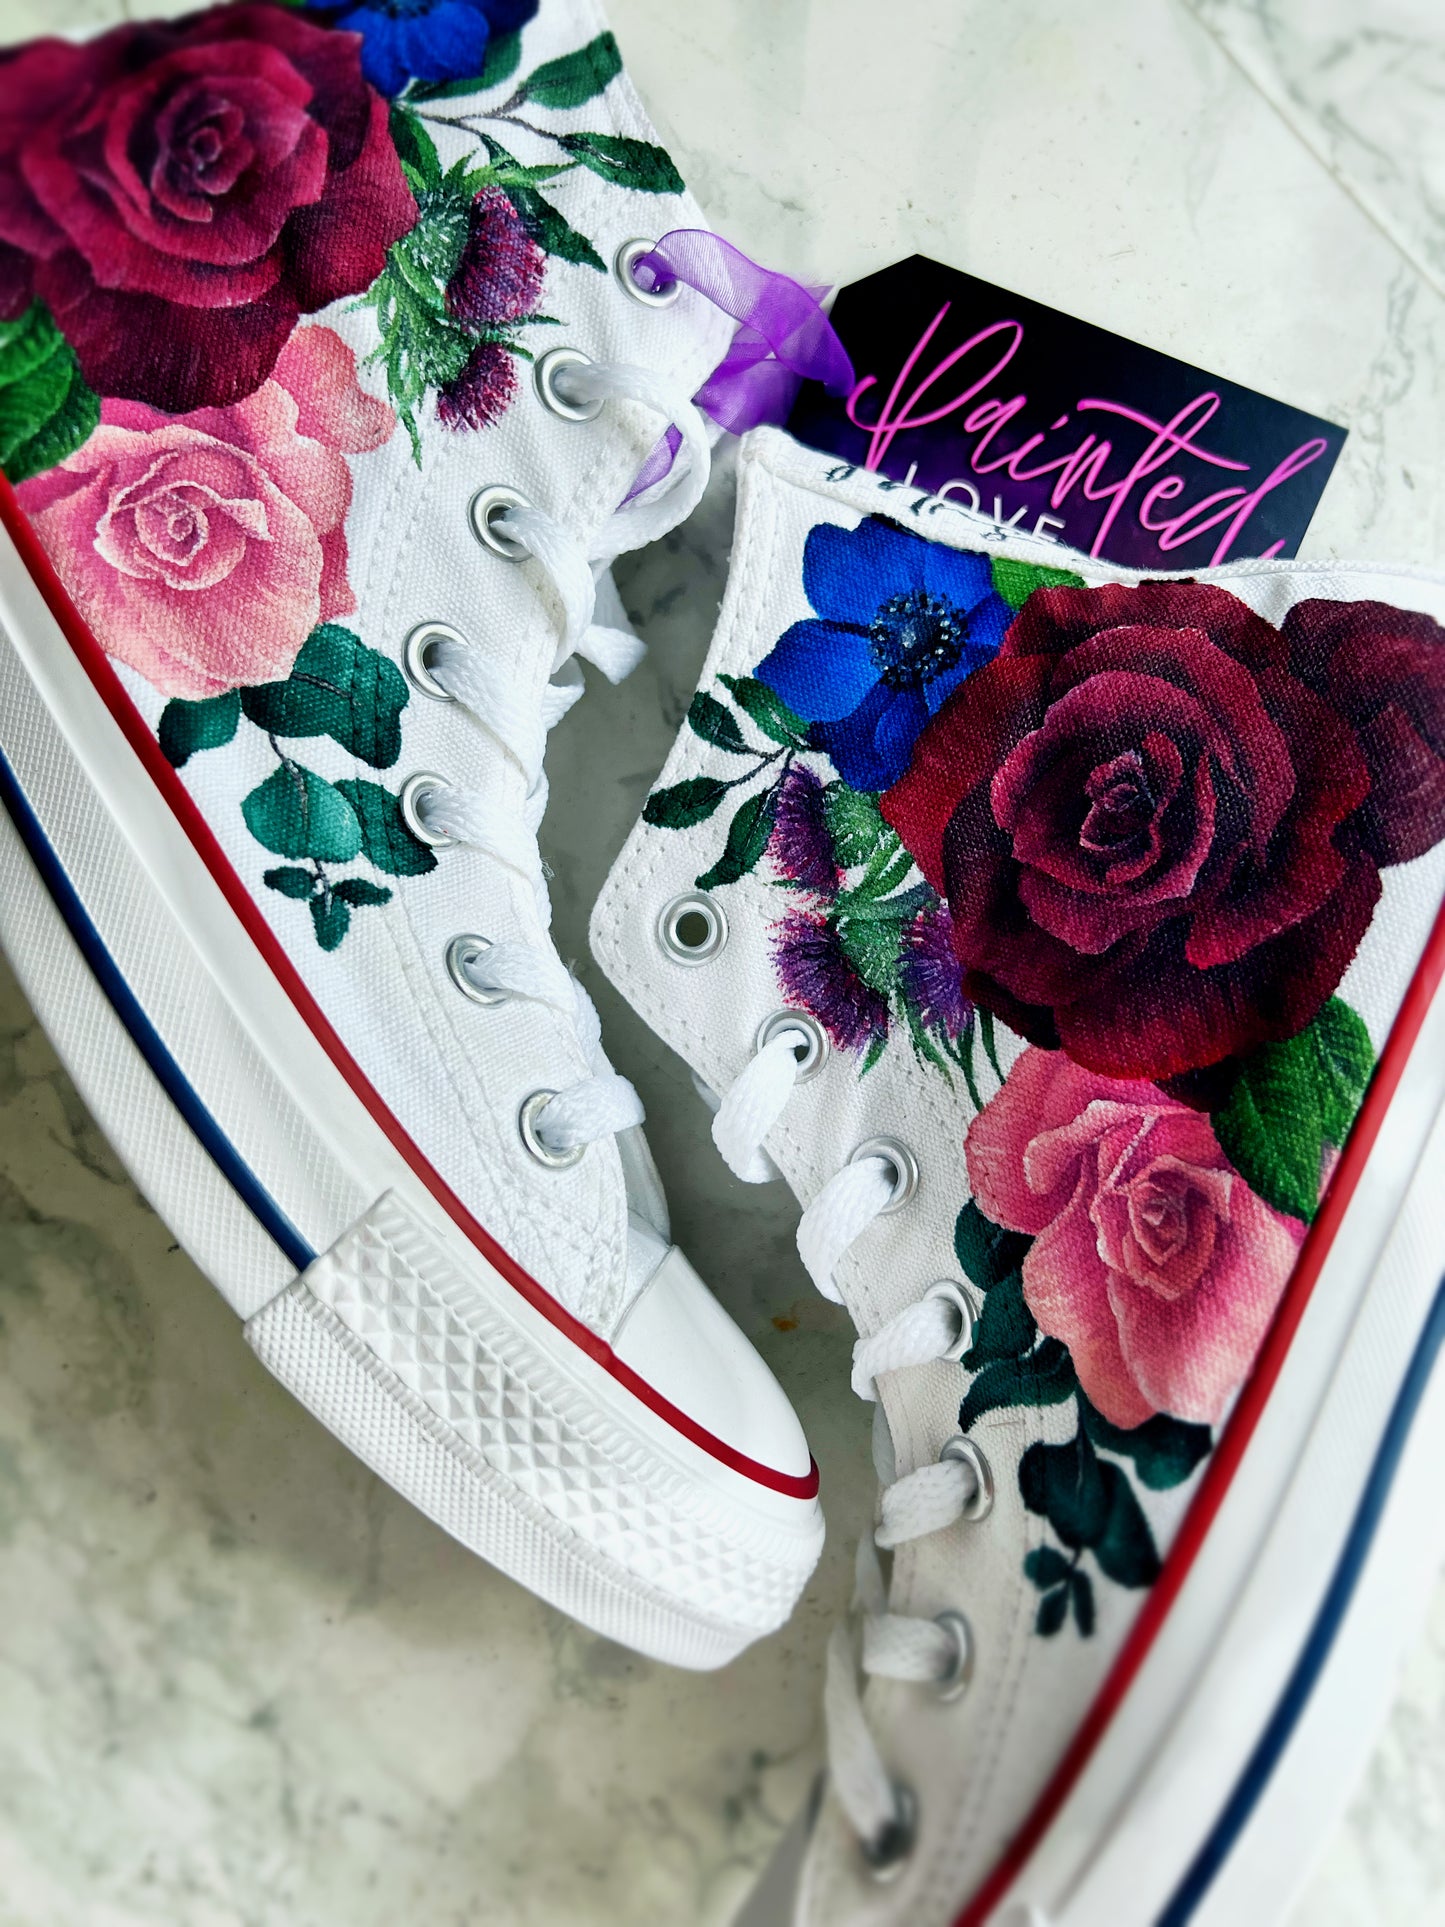 Hand Painted Converse High Tops, Custom Painted Converse, Shoe Painting Service, Wedding Converse